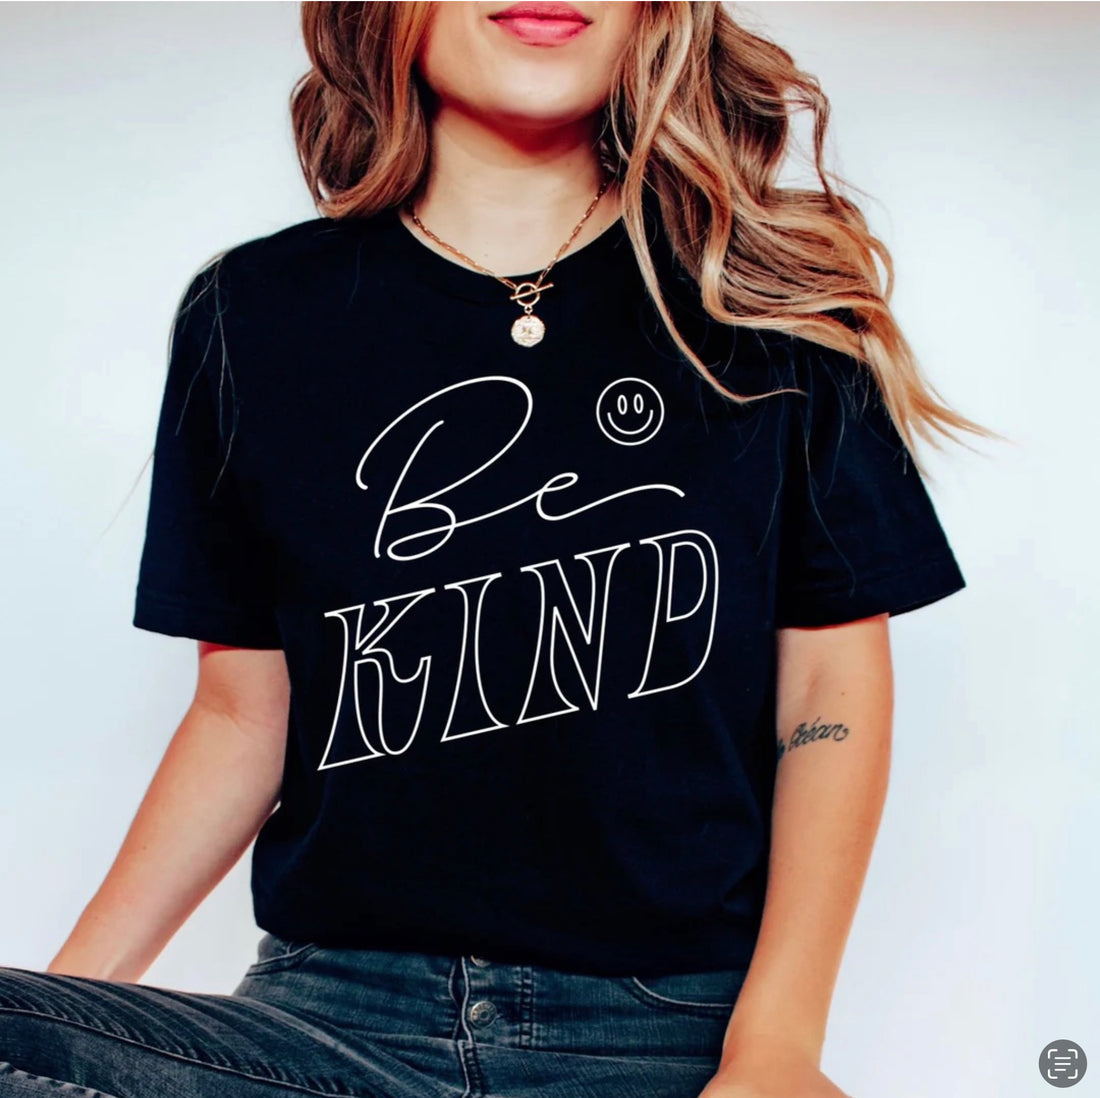 ‘’Be Kind” Graphic Tee